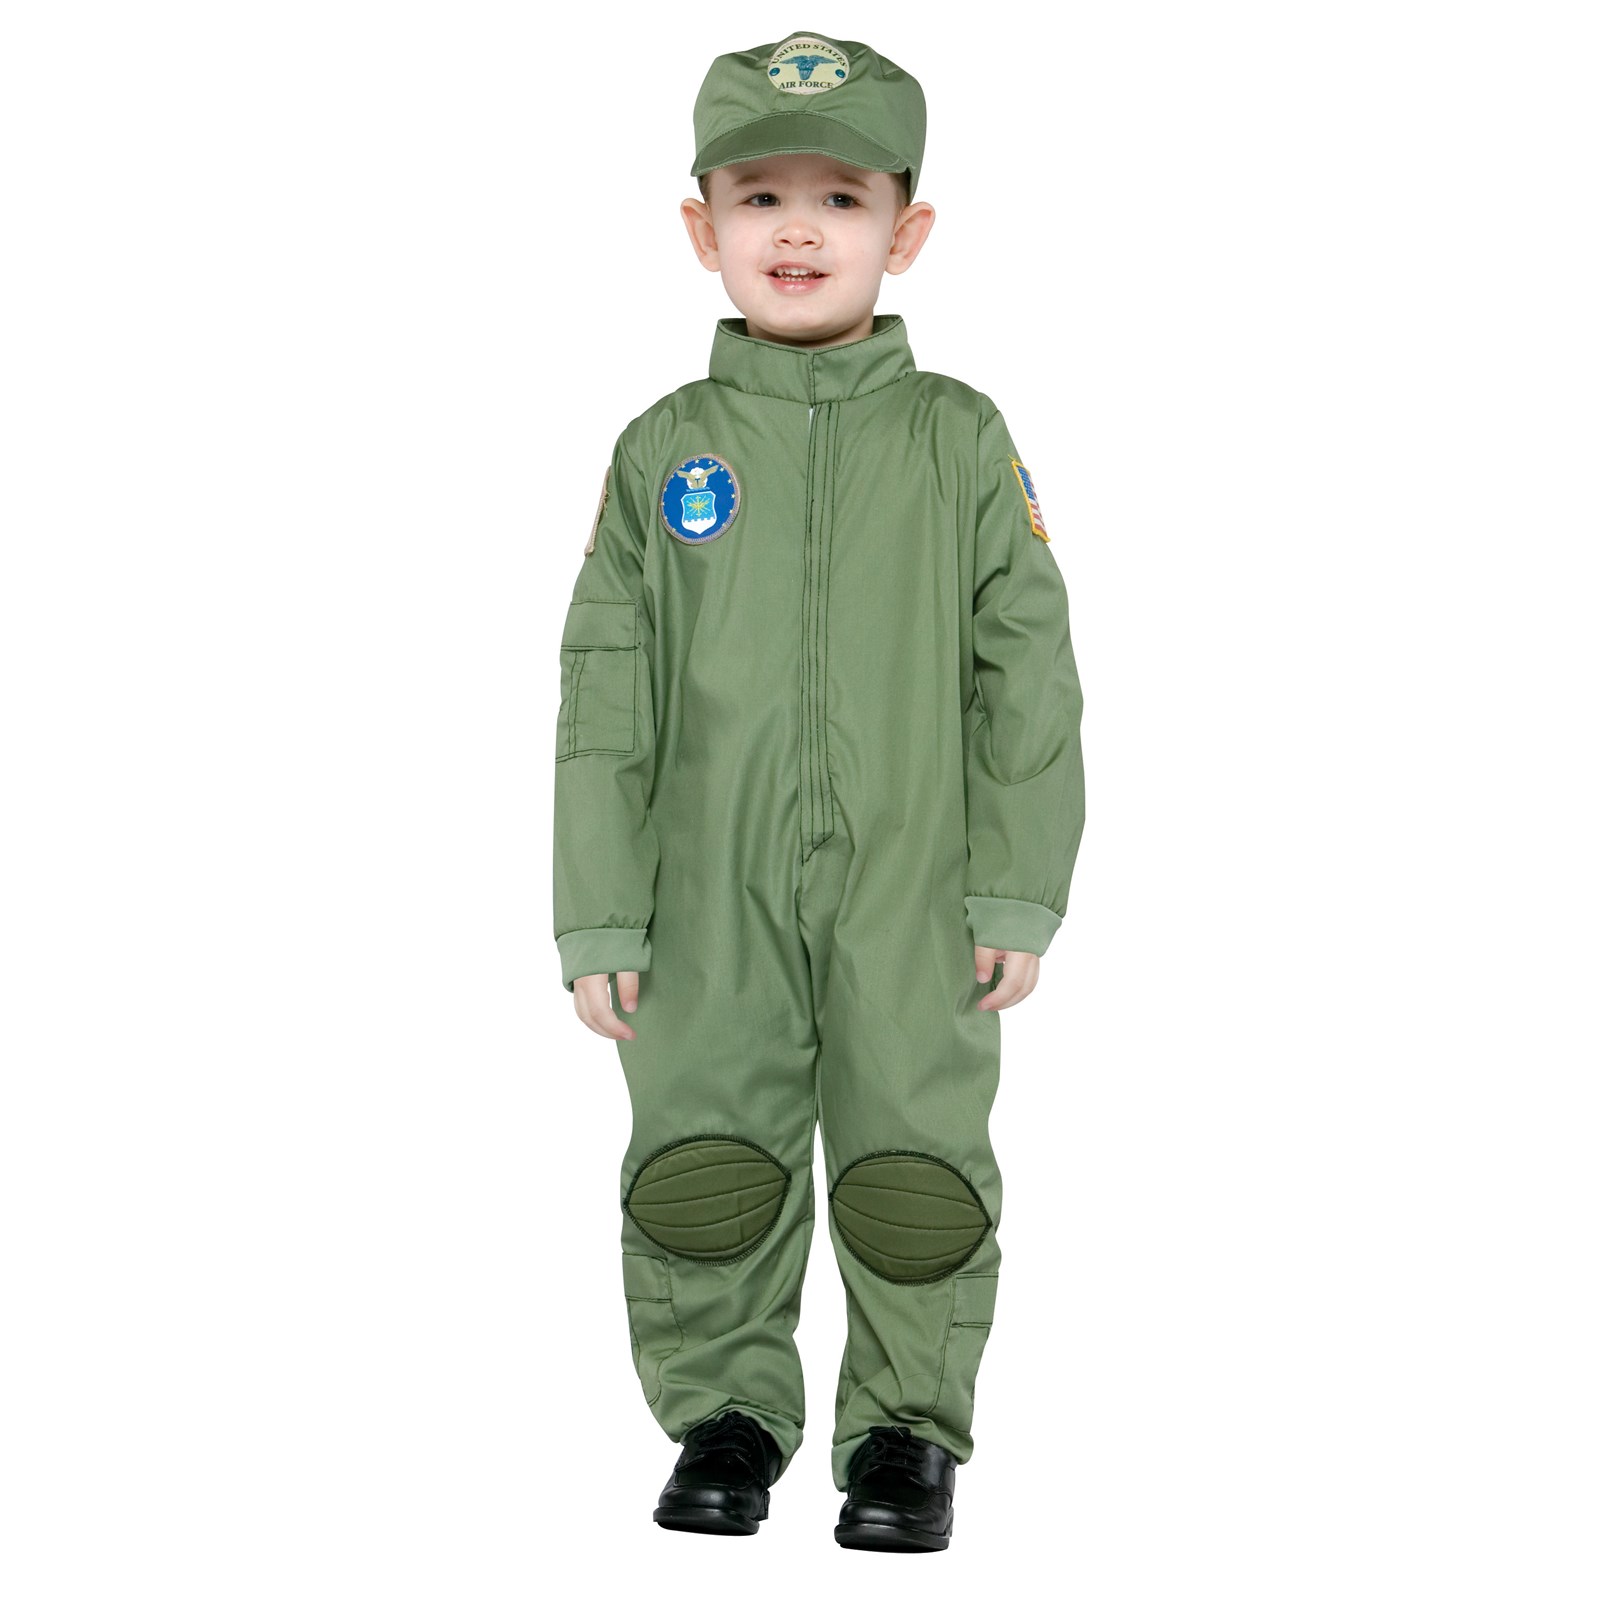 Air Force Uniform Toddler Costume | BuyCostumes.com1600 x 1600